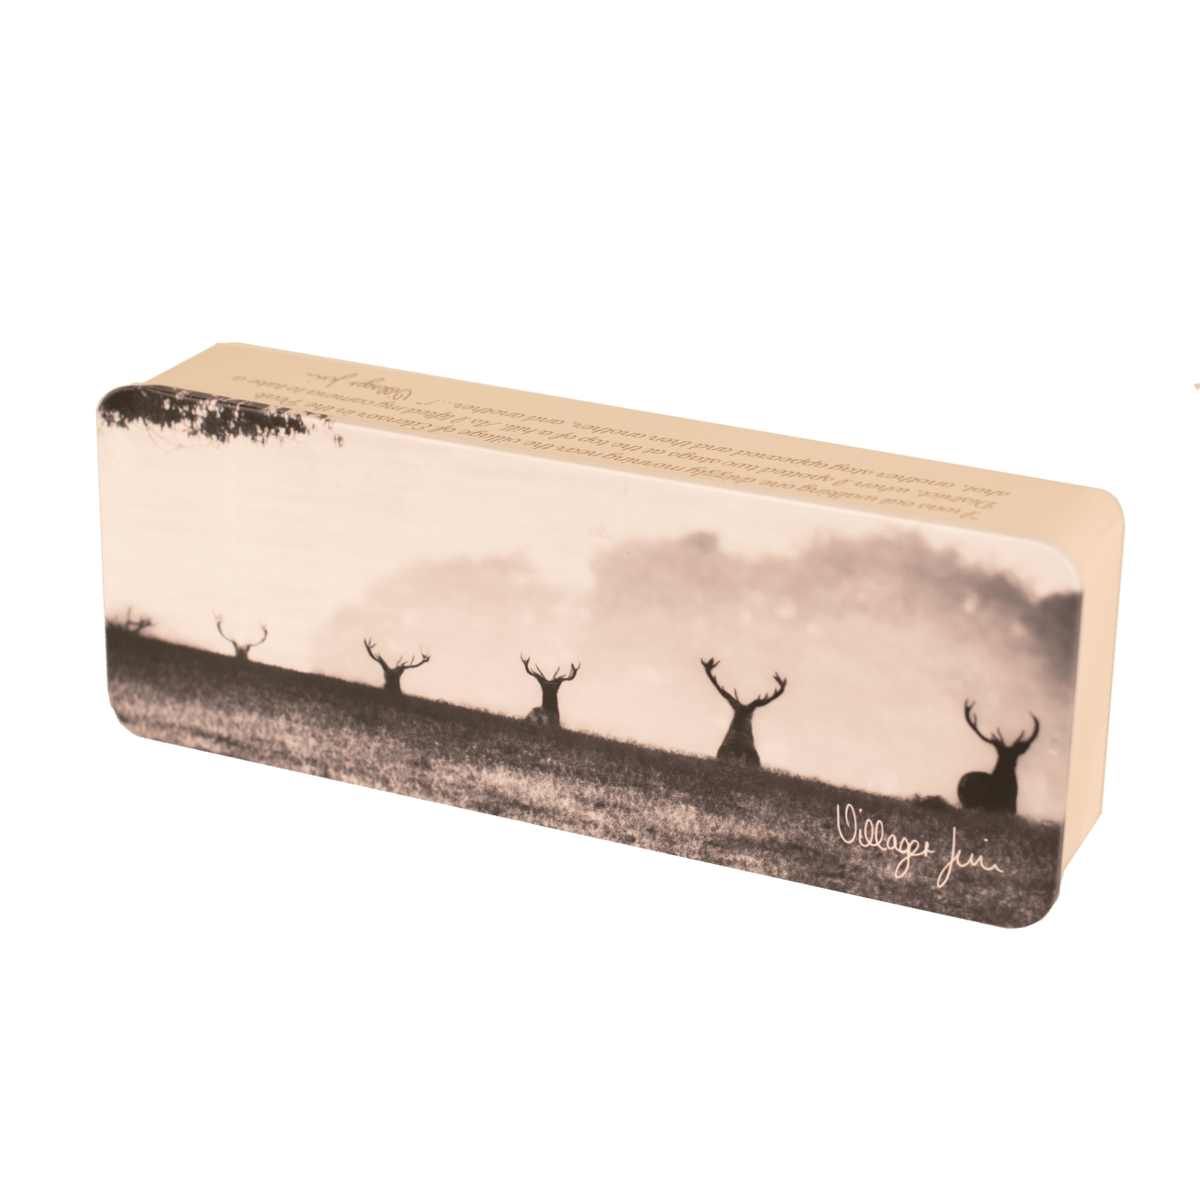 Villager Jim "Ascent of the Stag" All Butter Shortbread Squares 180g Thumbnail